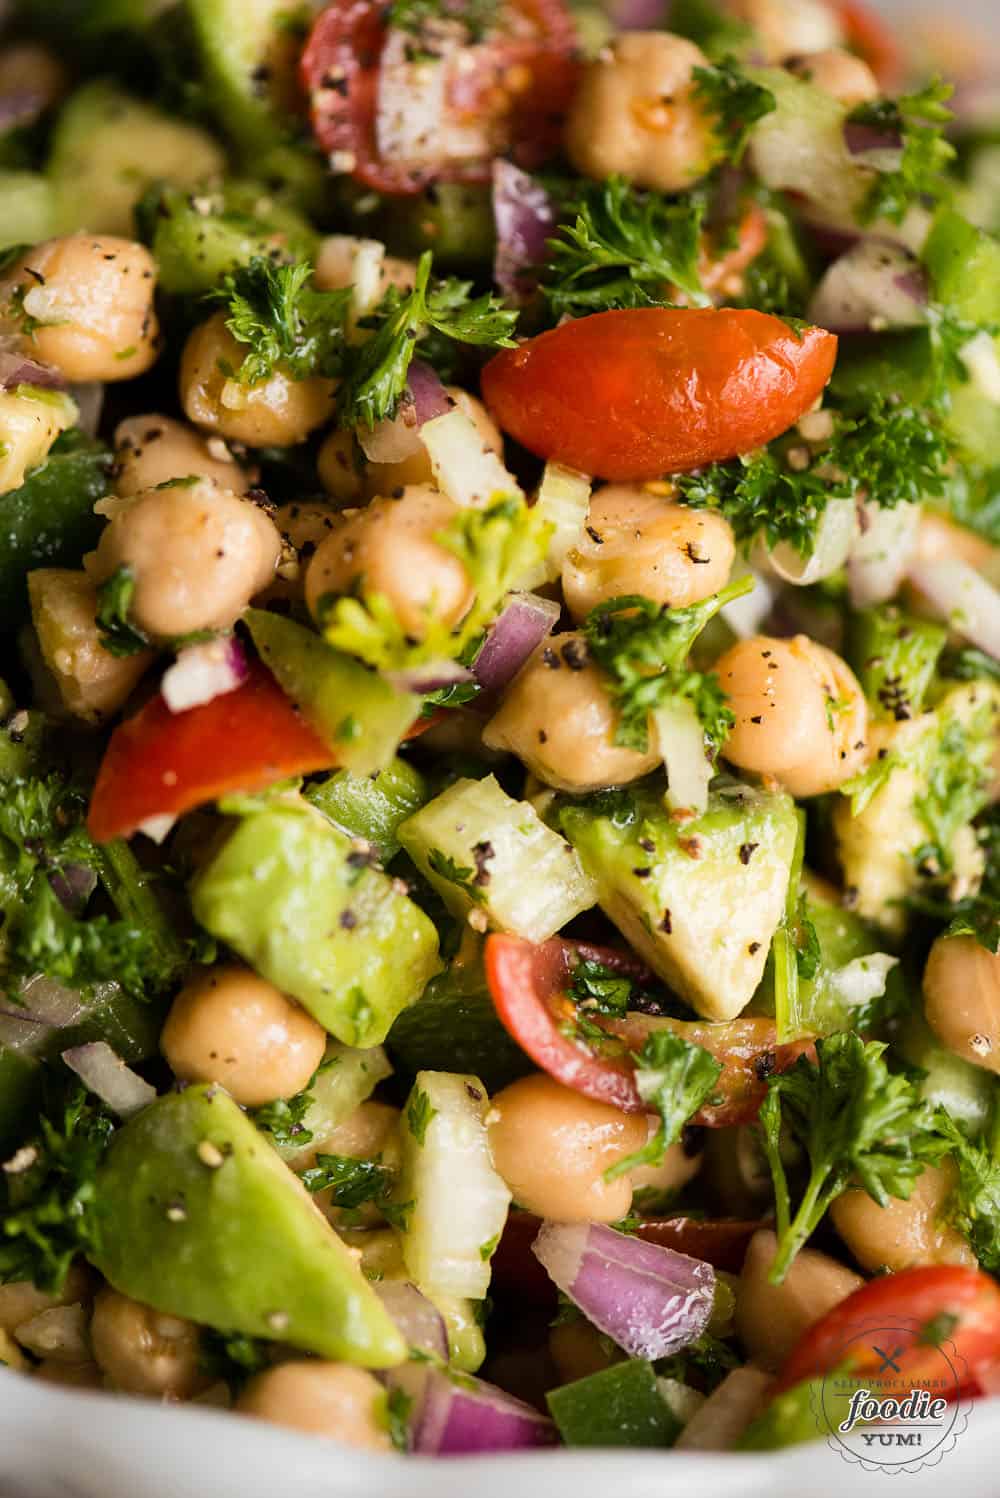 How to make Chickpea Salad